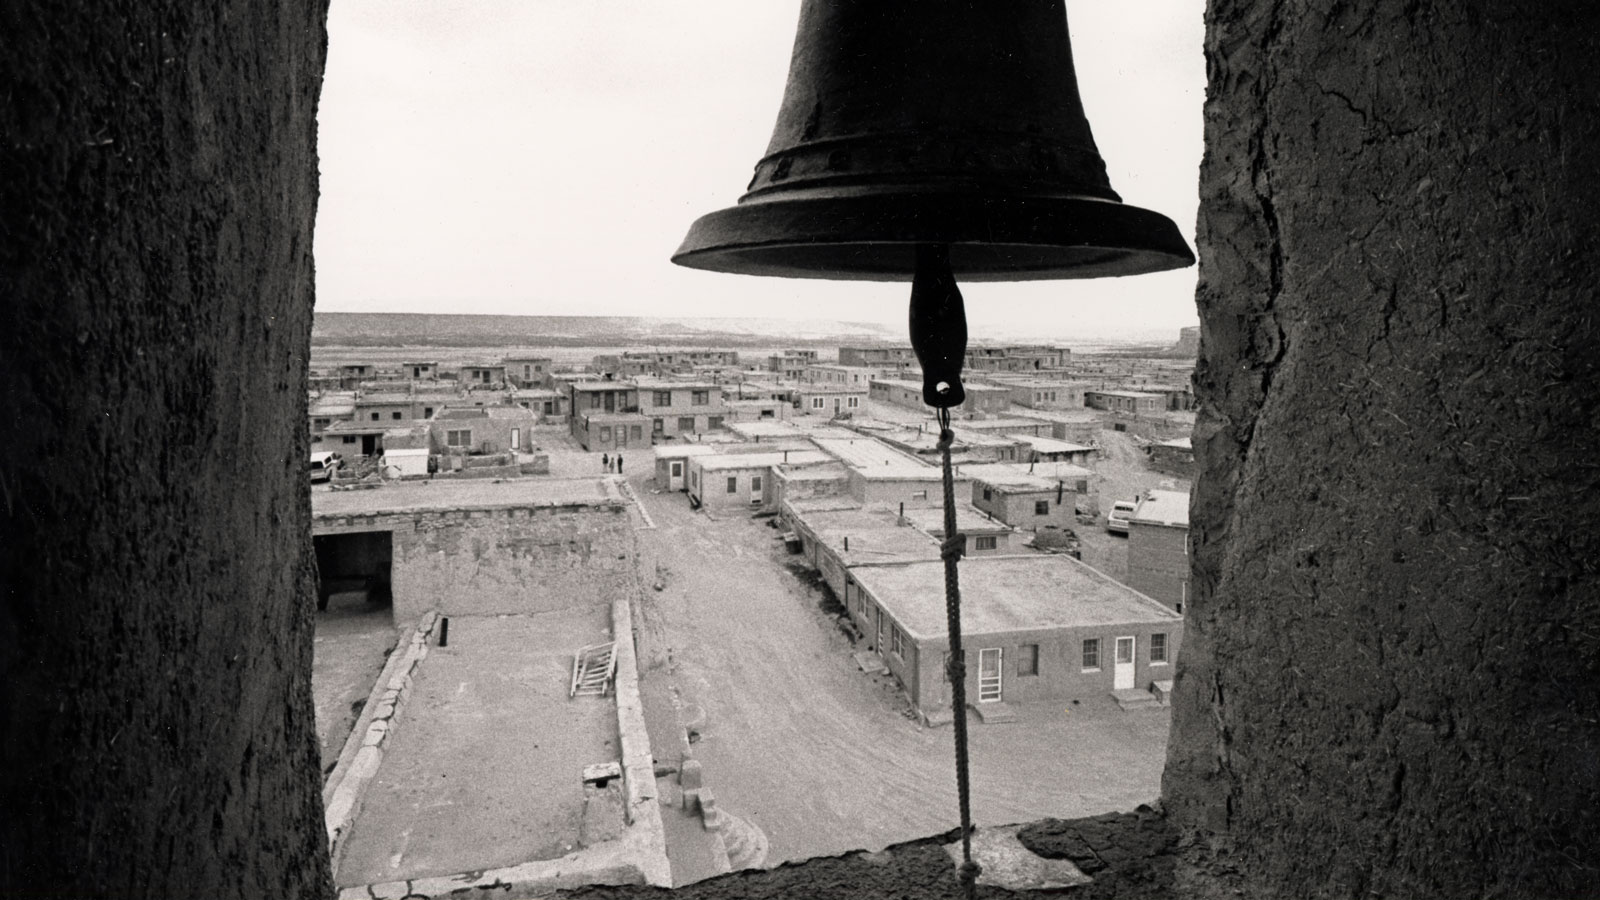 Lee Marmon, Acoma Mission Bell, 1985, gelatin silver print, #2000-017-0031, Center for Southwest Research, University of New Mexico